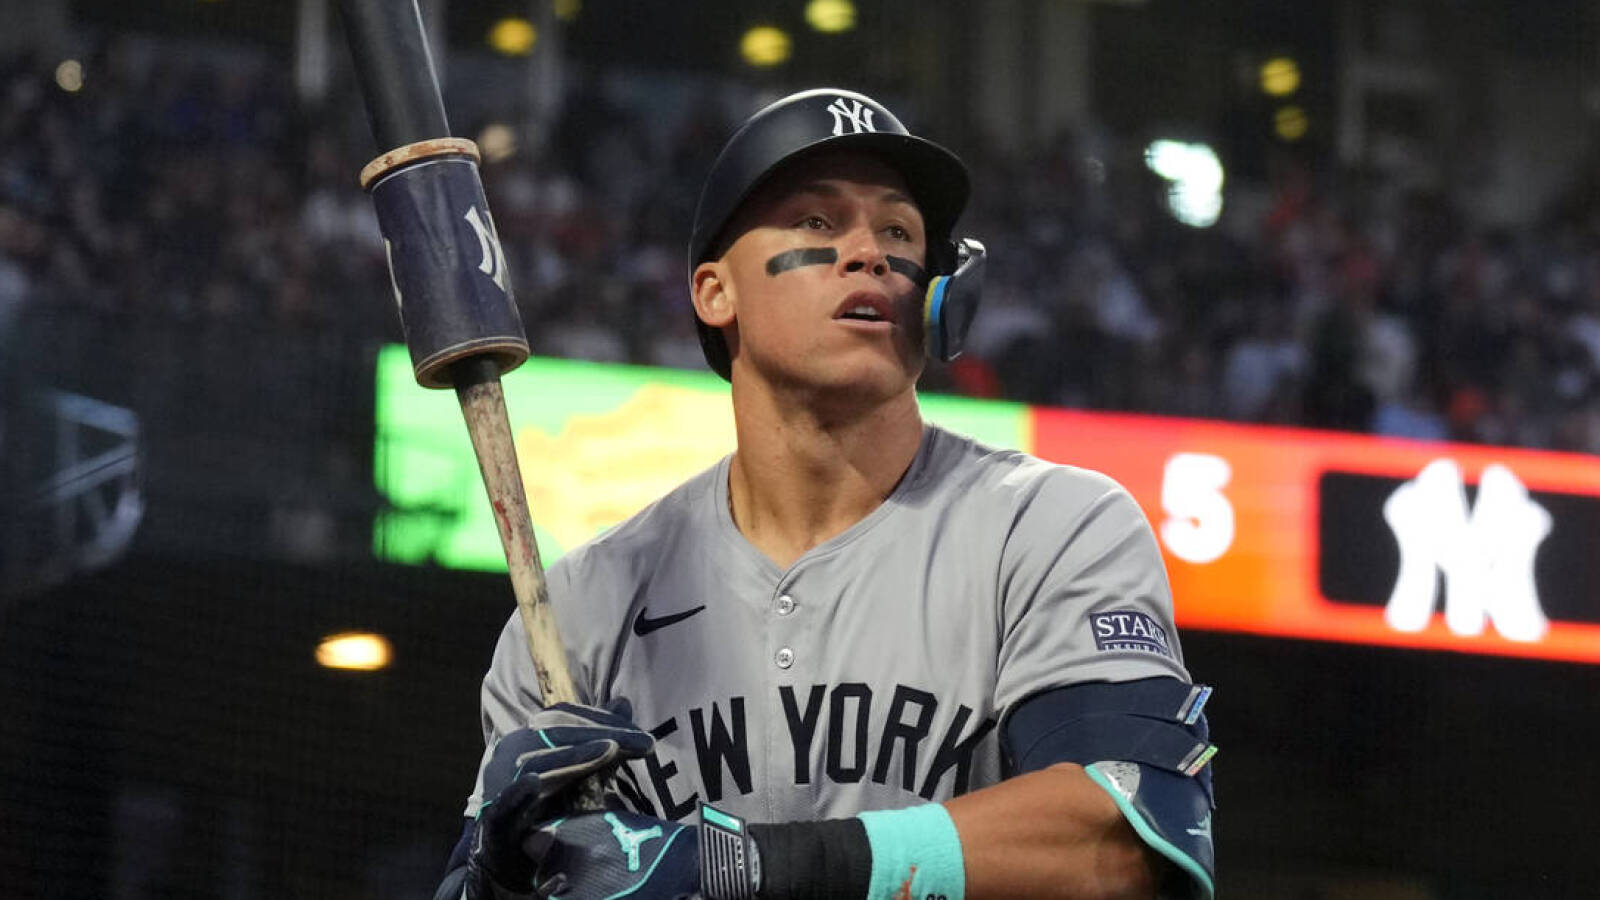 Watch: Yankees' Aaron Judge hears boos from Giants fans before launching two home runs